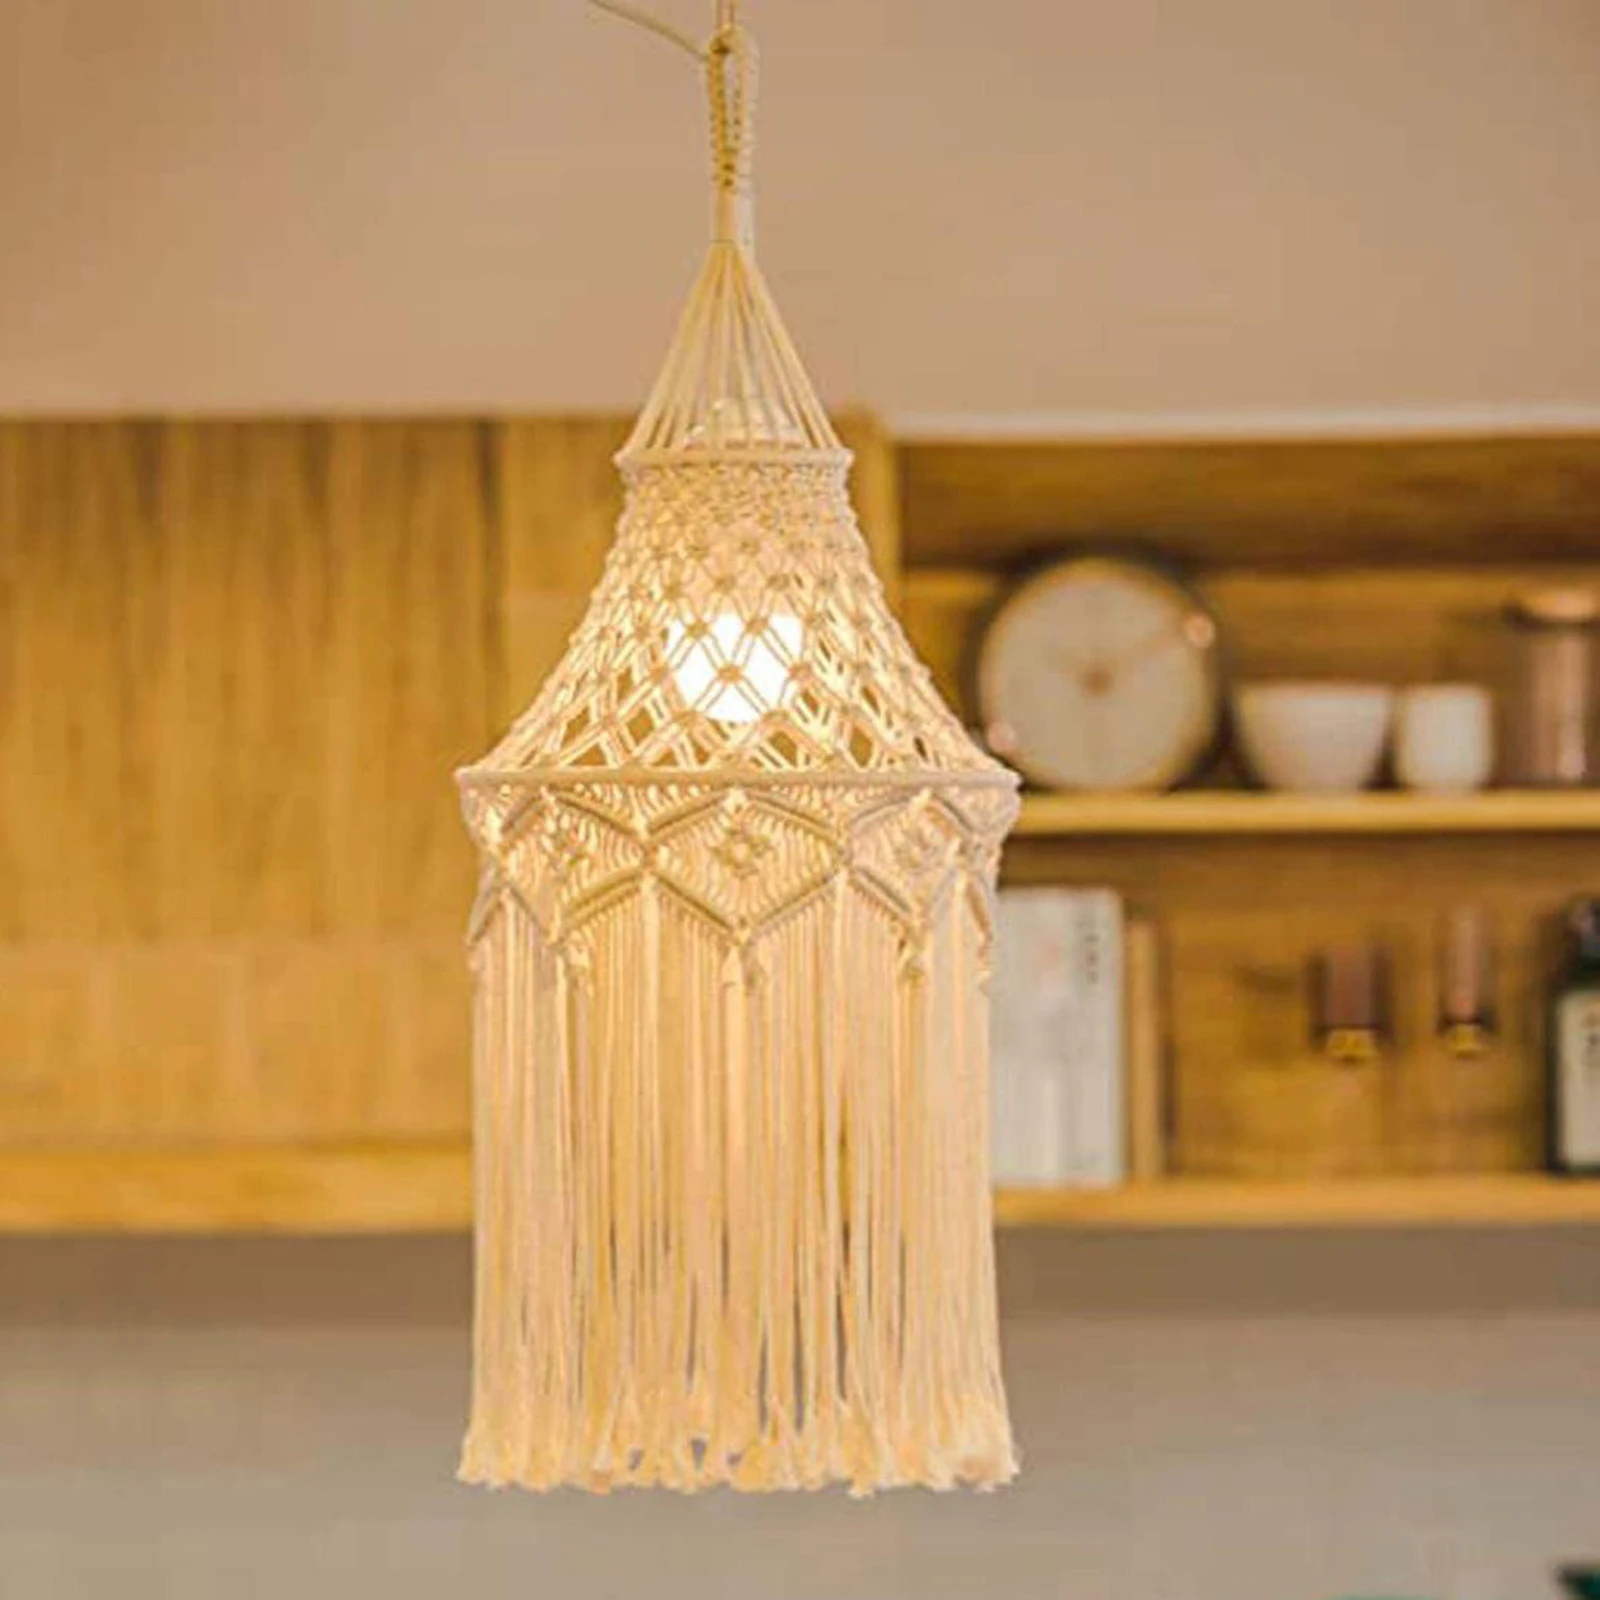 Handwoven Macrame Pendant Lampshade Boho Chic Decors for Light Chandeliers